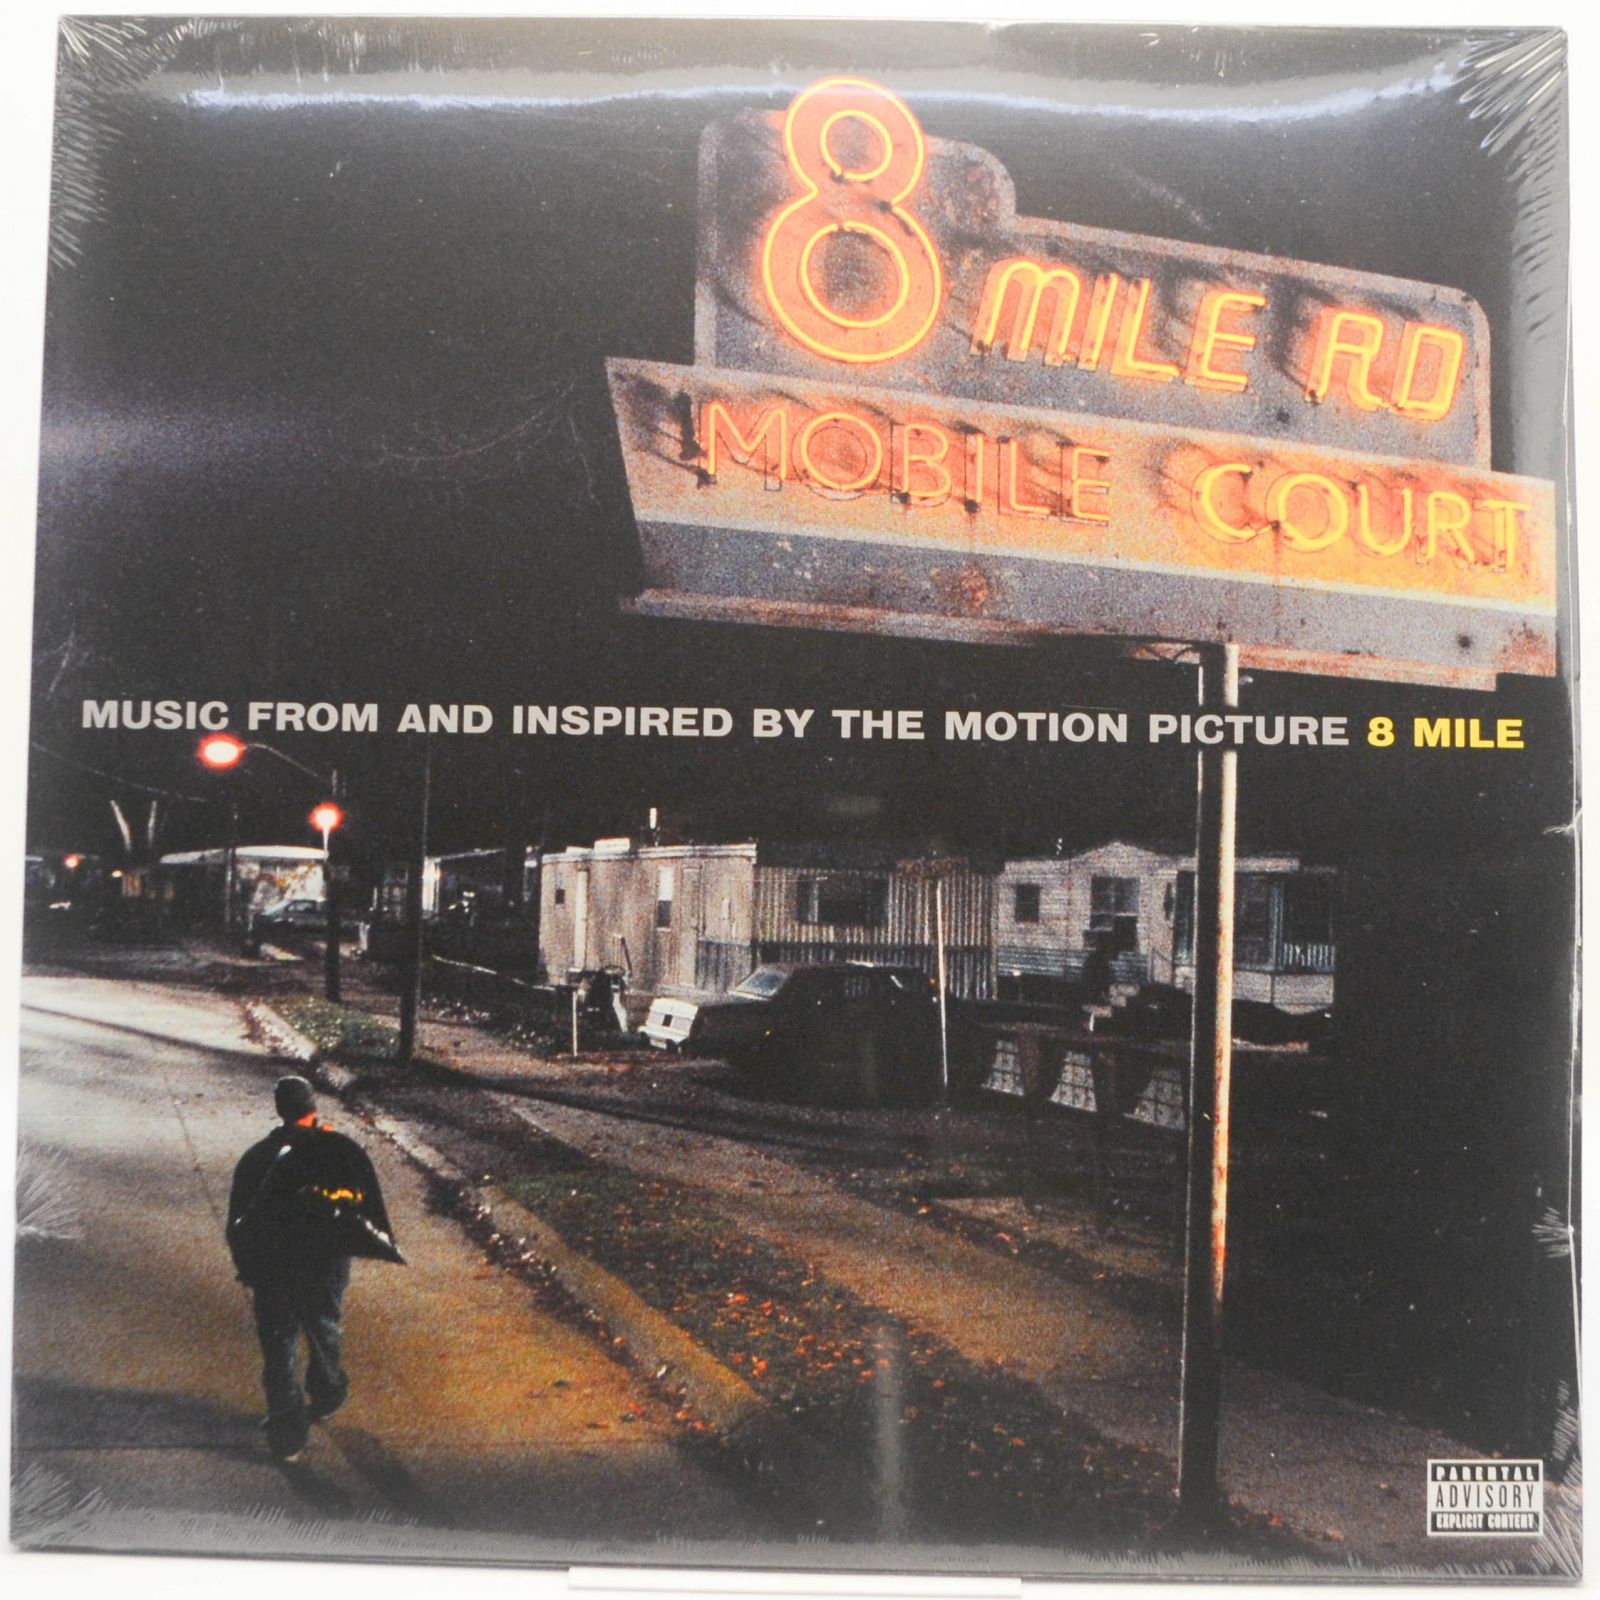 Various — Music From And Inspired By The Motion Picture 8 Mile (2LP), 2013